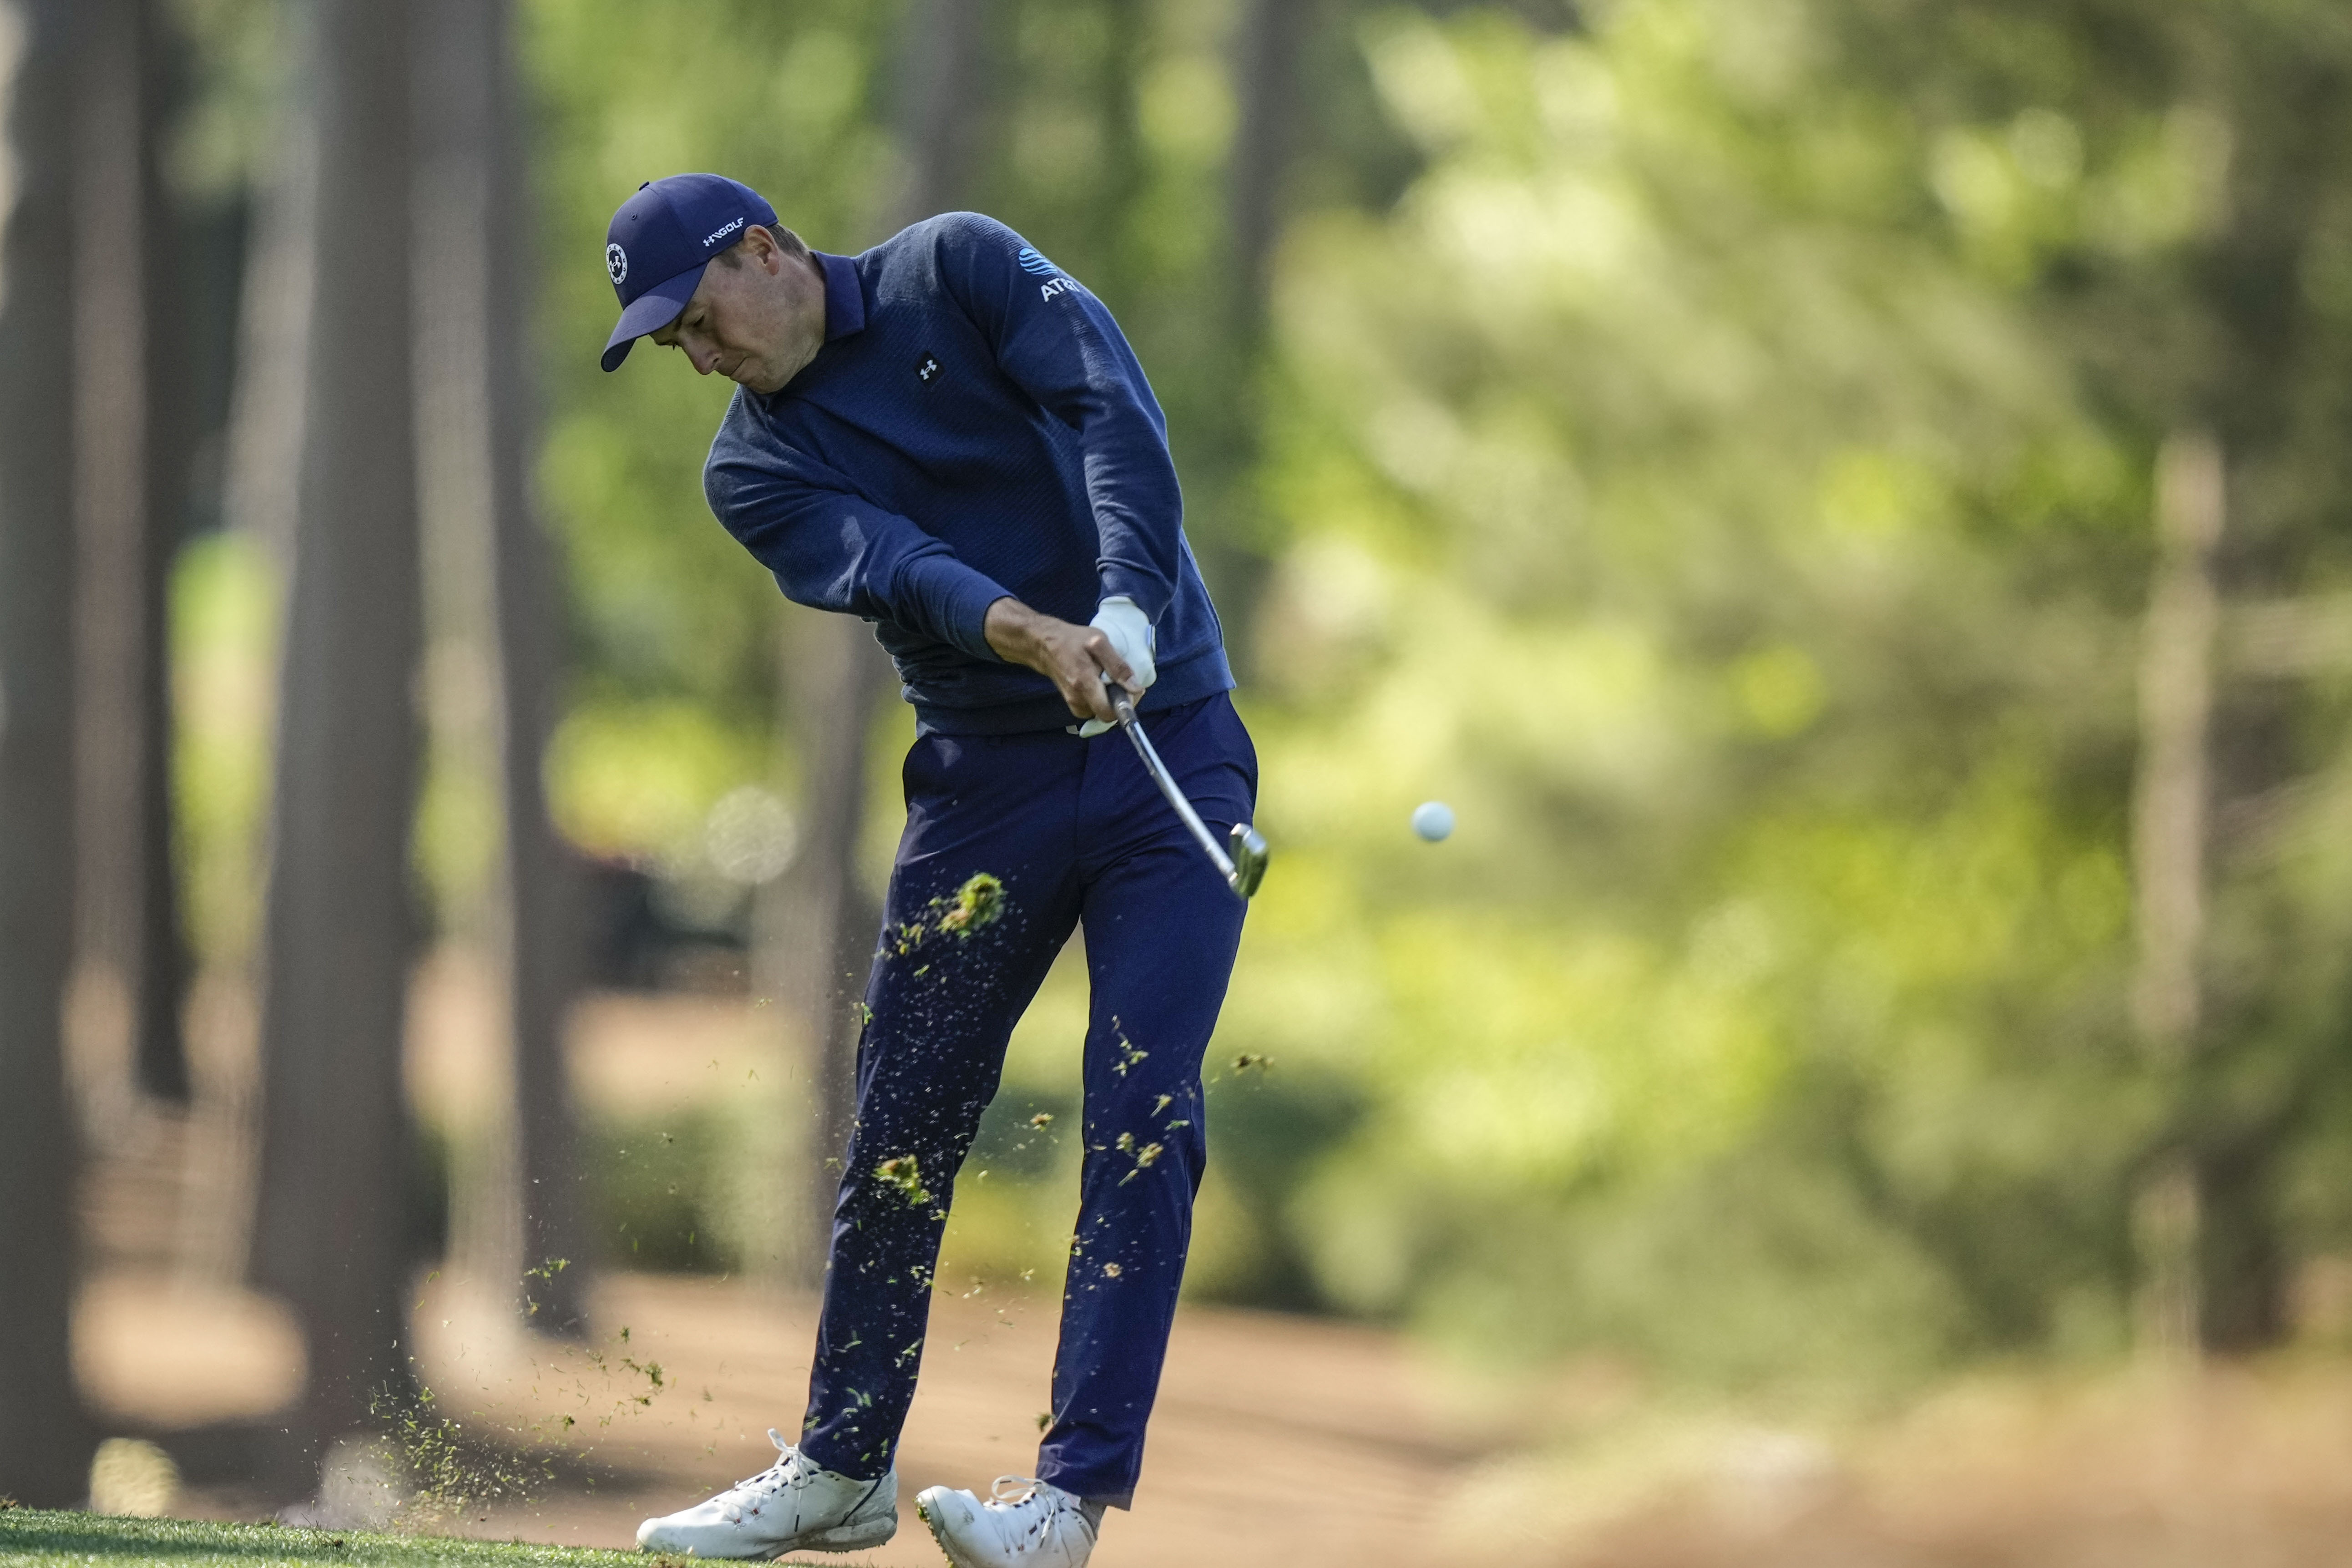 Dallas Jordan Spieth fights back with dominant final round to finish Masters at 7-under